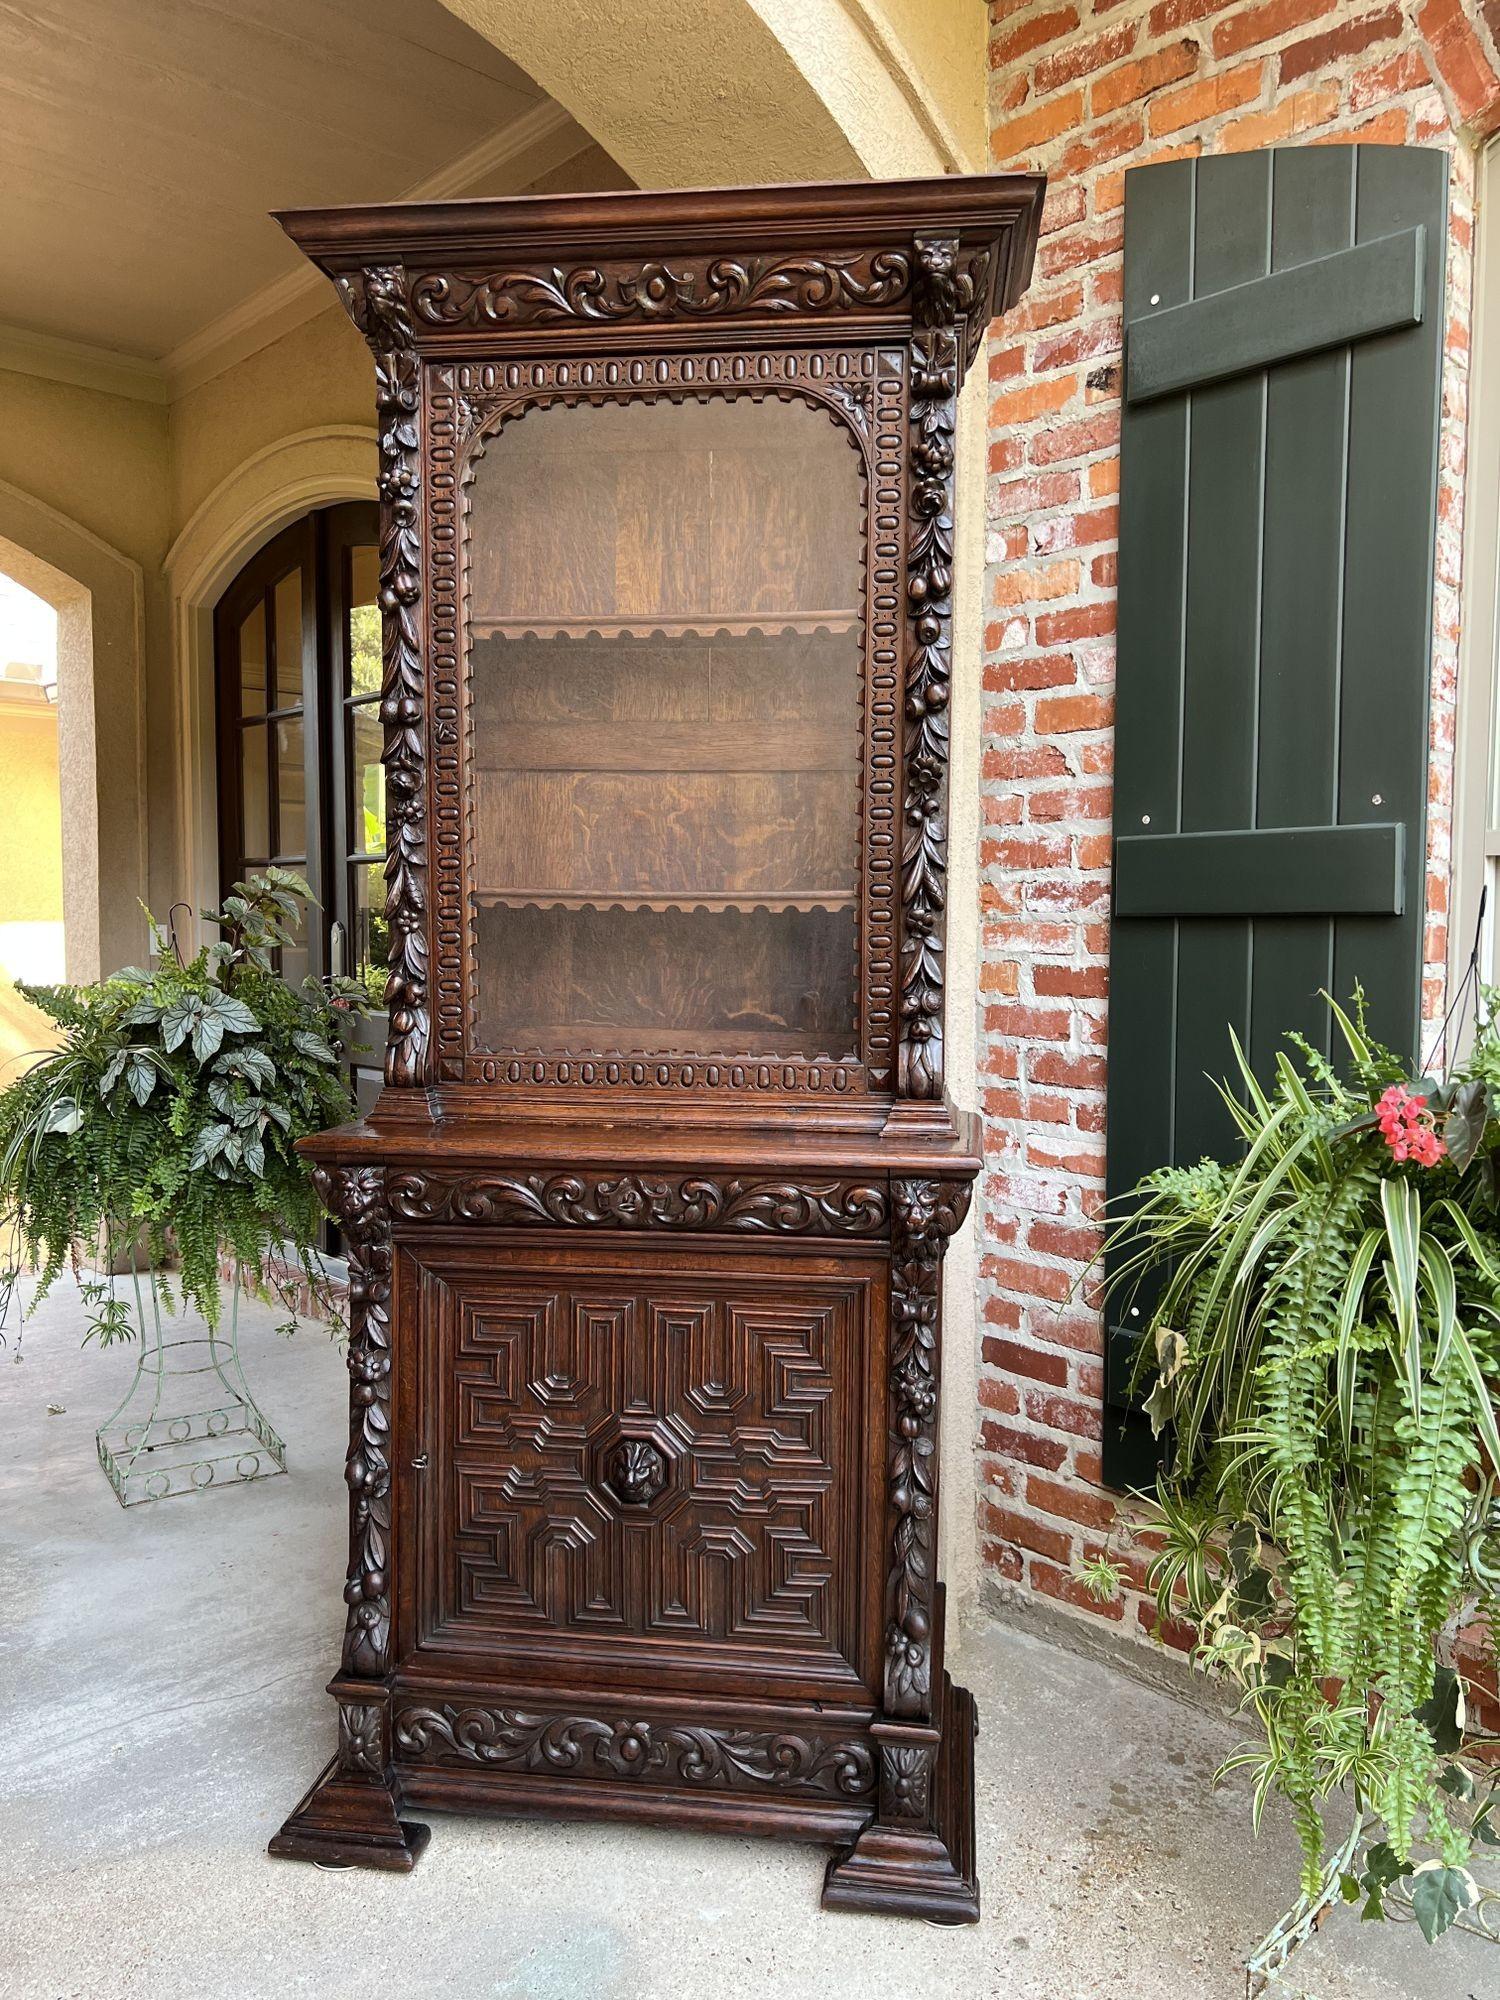 Superb 19th century Antique French Dark Oak “Hunt Cabinet”, Bookcase, Vitrine or Display Cabinet!
 
Direct from France, and one of several exquisite glass door bookcase/cabinets from our most recent container. Wonderfully hand carved oak pieces in